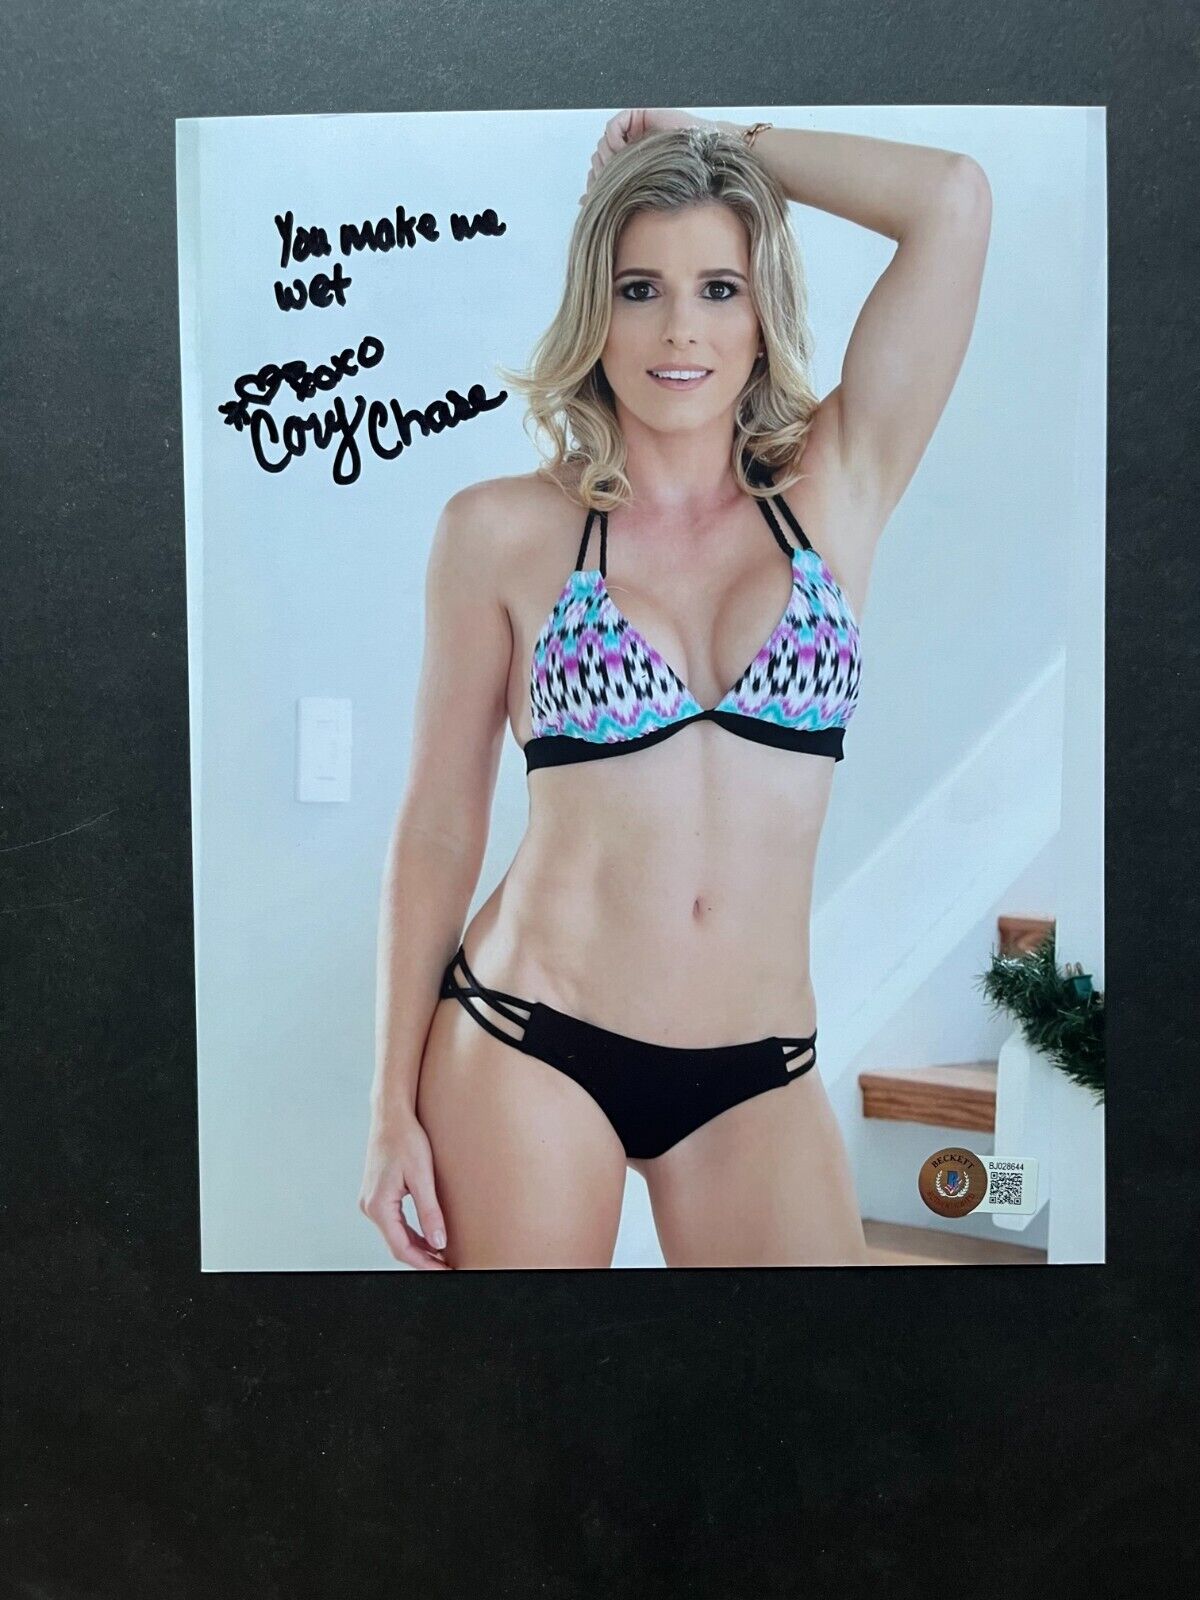 colleen reay recommends corey chase pornstar pic